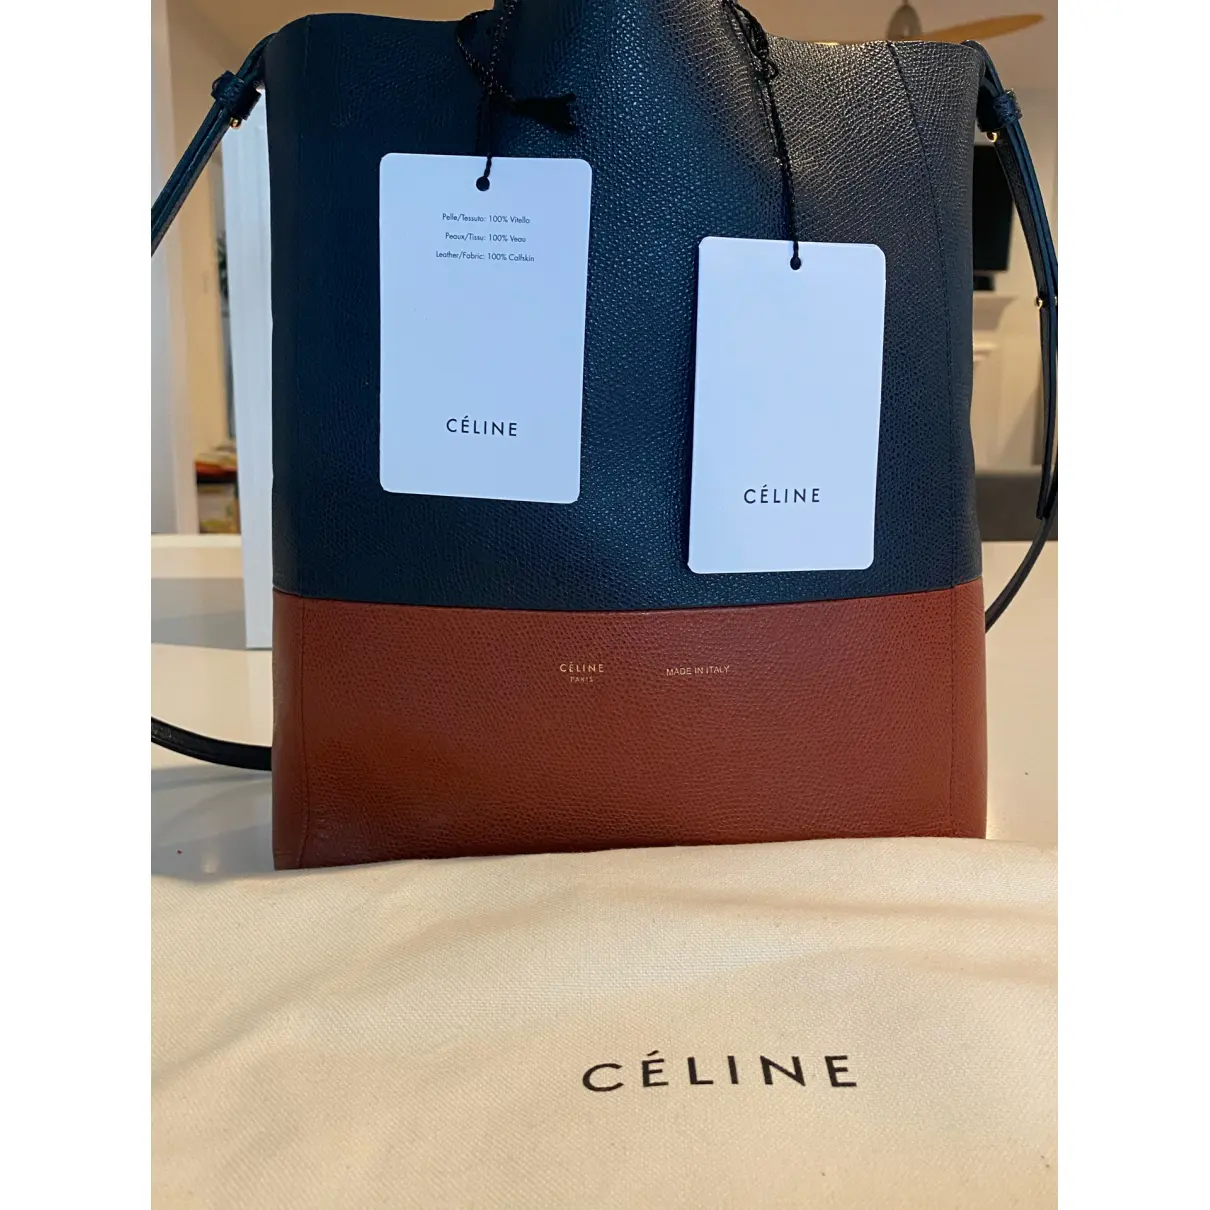 Buy Celine Cabas PM leather tote online